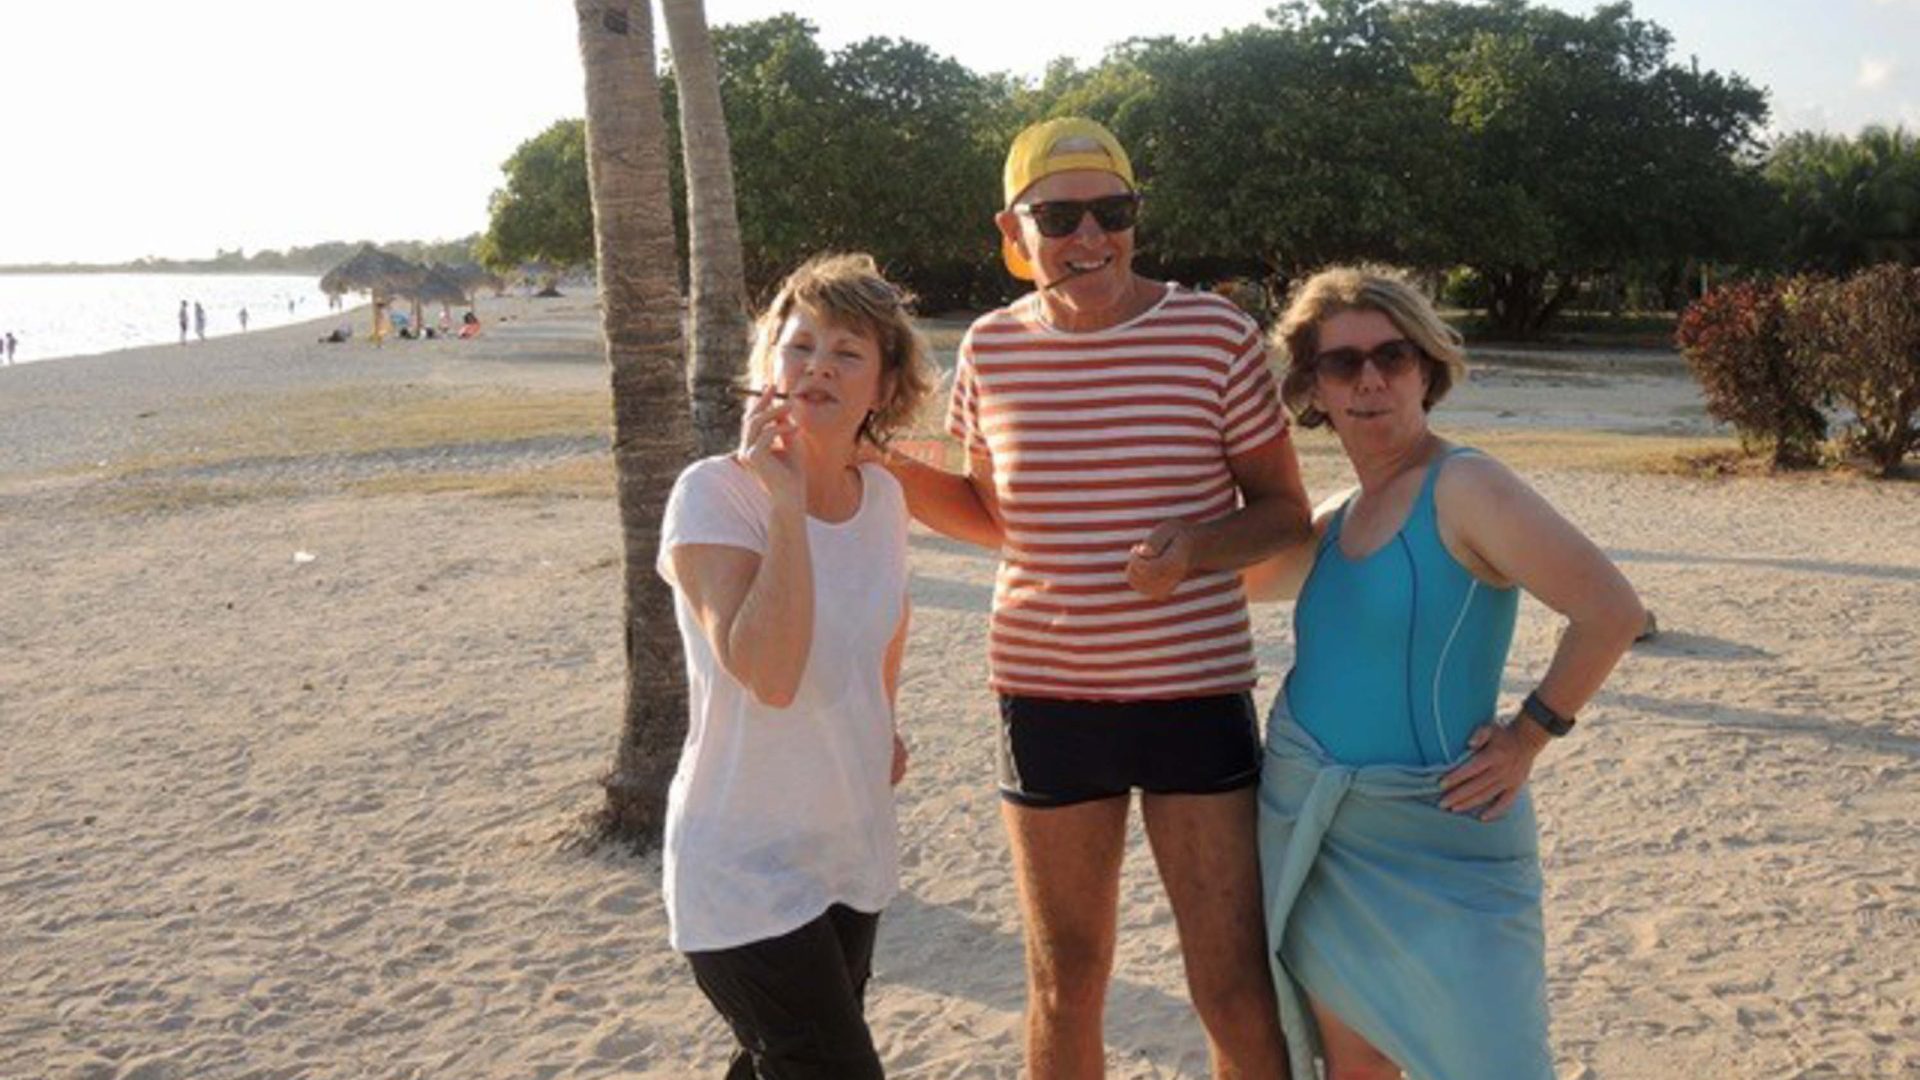 Jan, Sharon and another friend smile on a beach in Cuba.